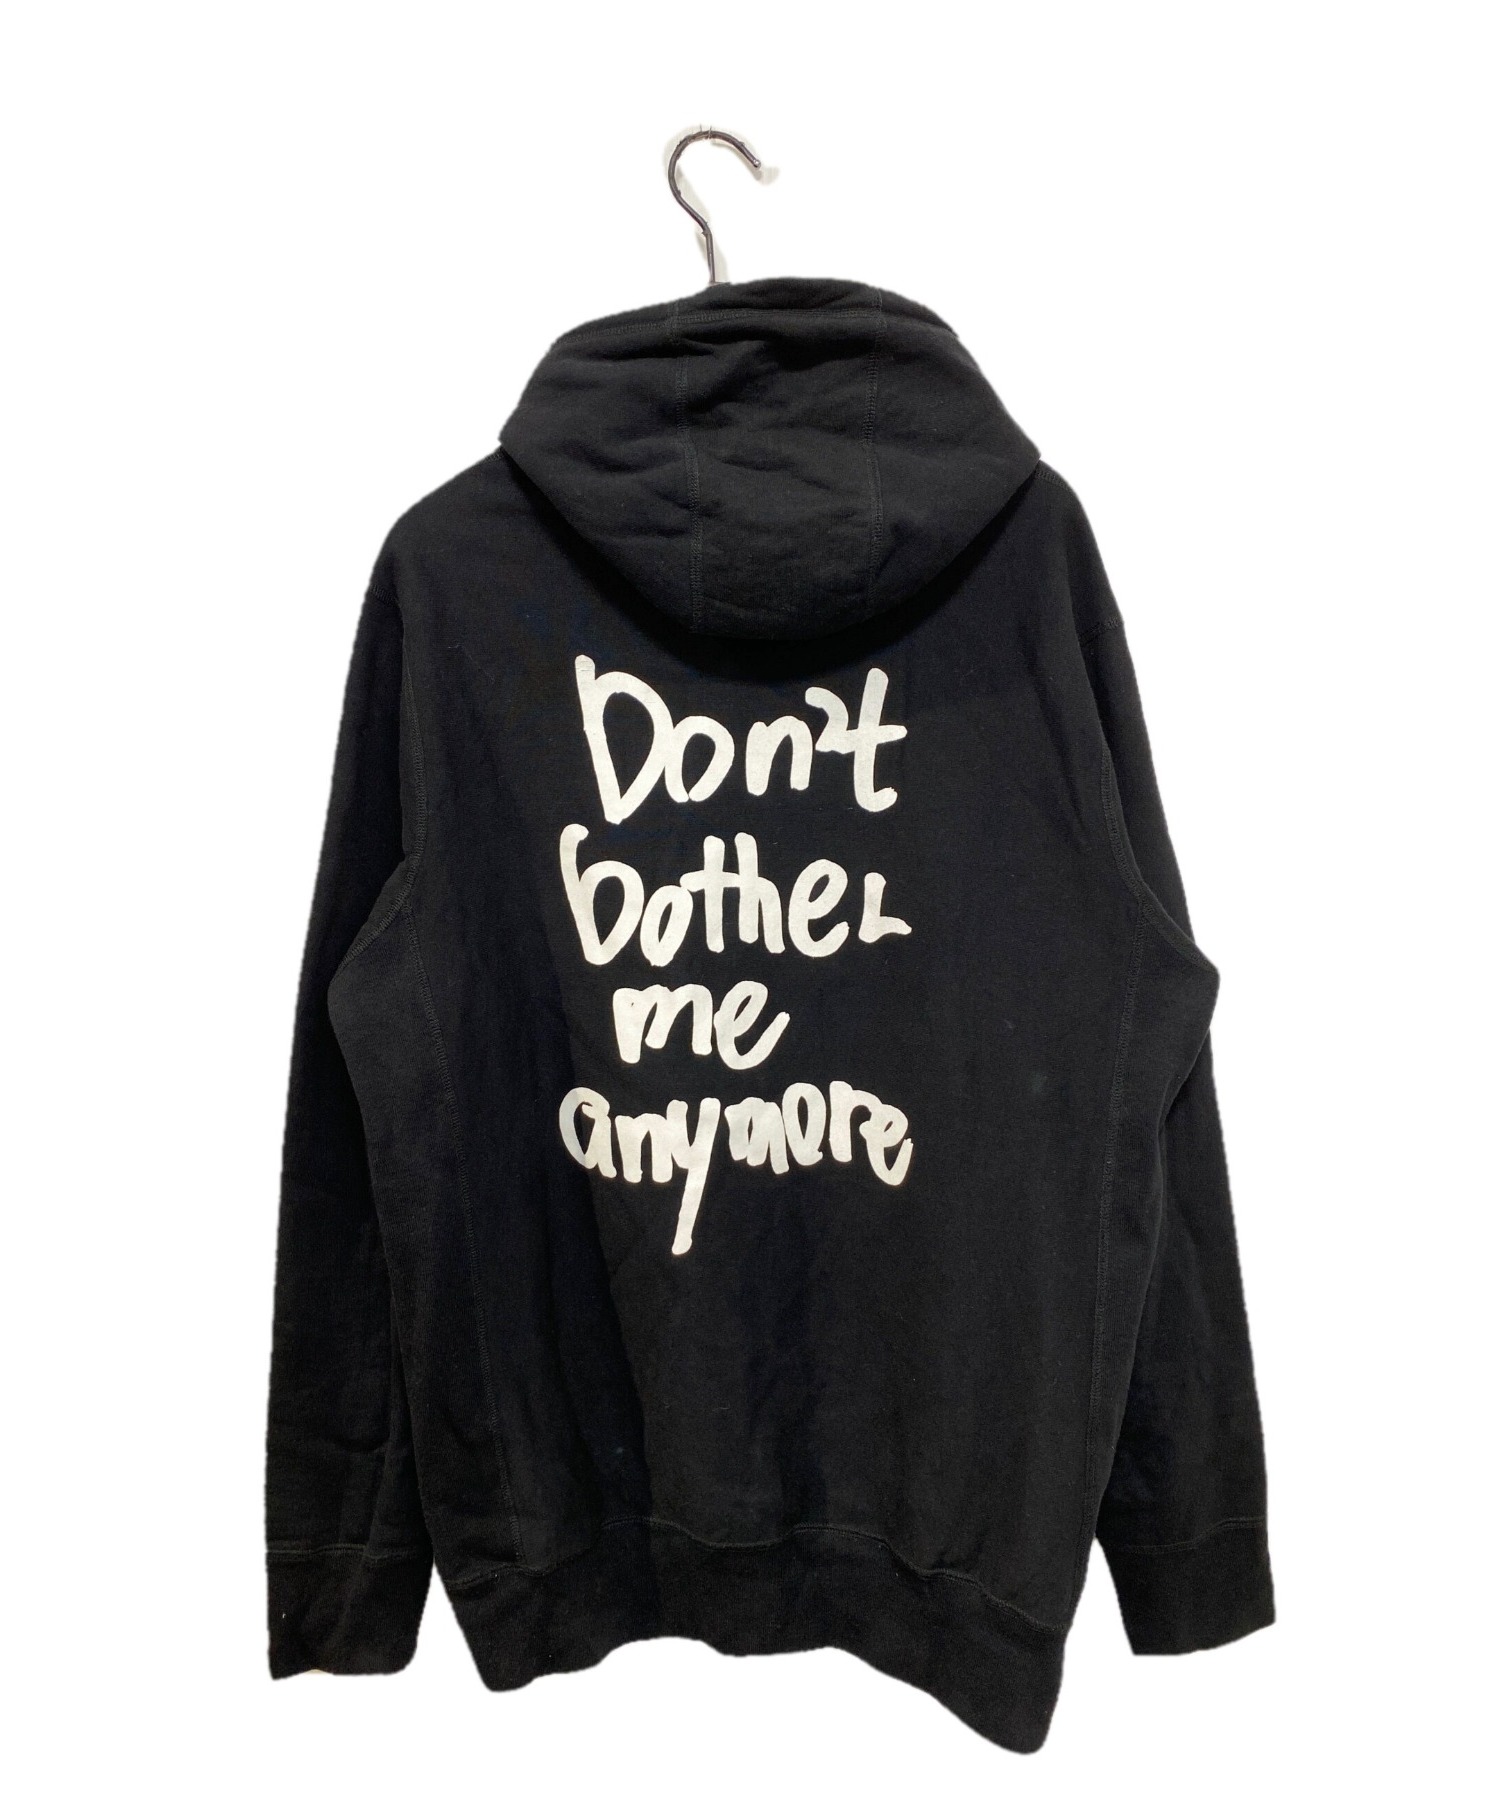 WASTED YOUTH (ウェイステッド ユース) DON'T BOTHER ANYMORE HOODY ブラック サイズ:Ｌ